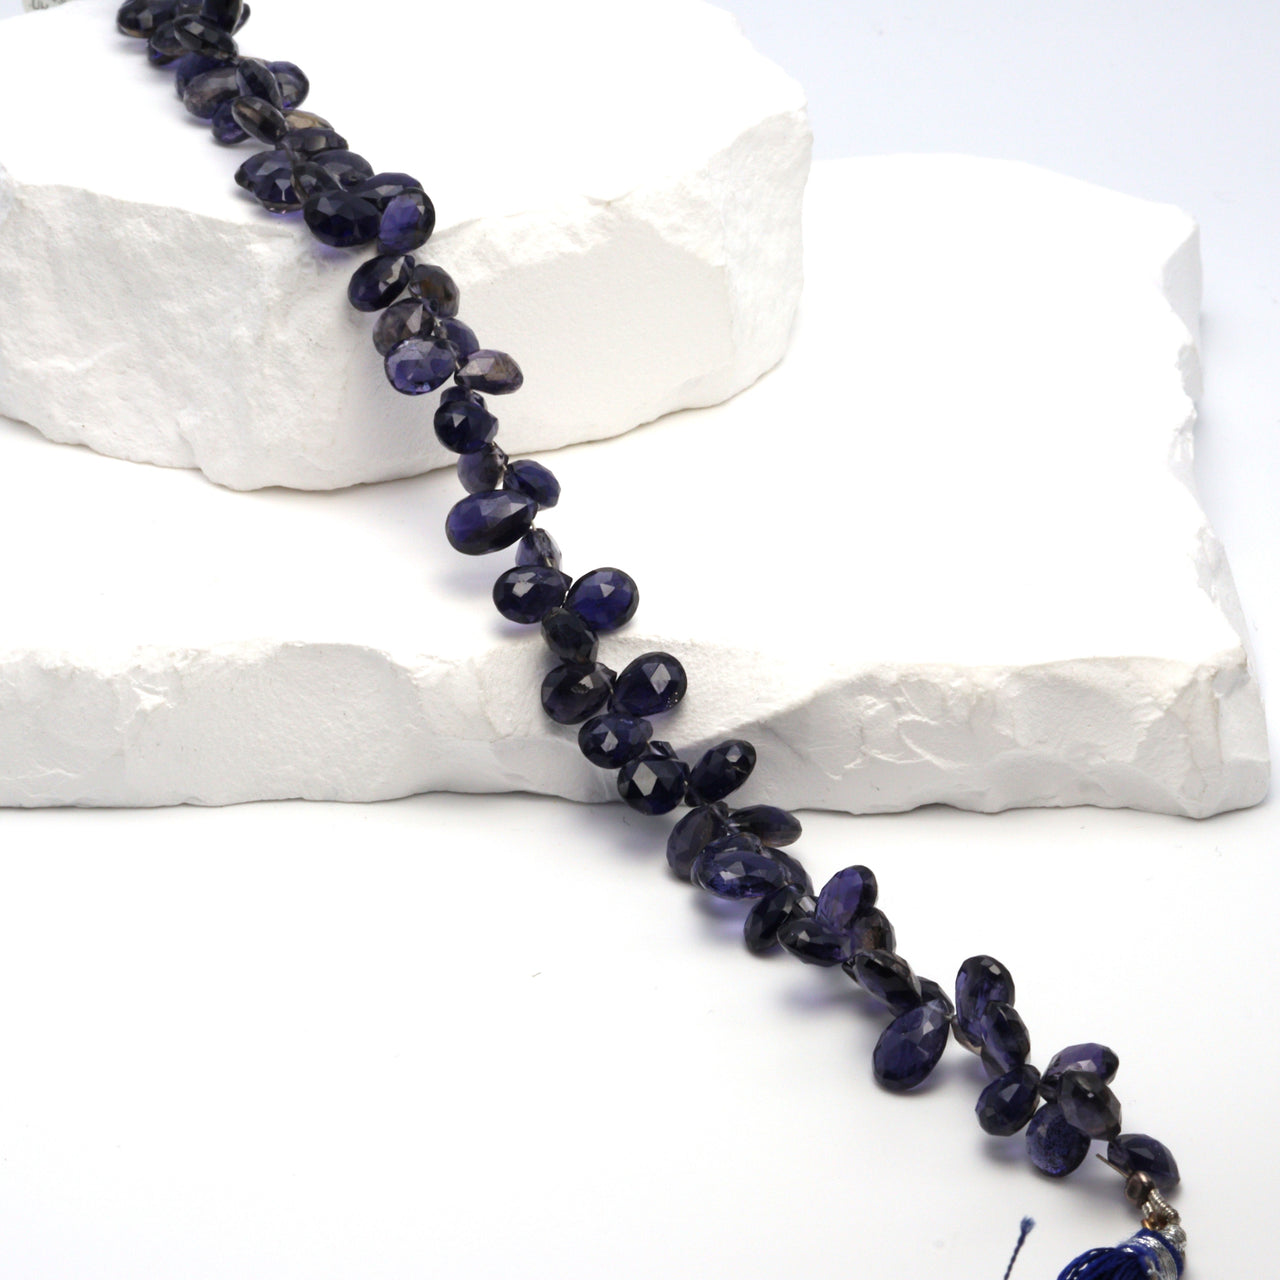 Blue Iolite 7x5mm Faceted Pear Shaped Briolettes